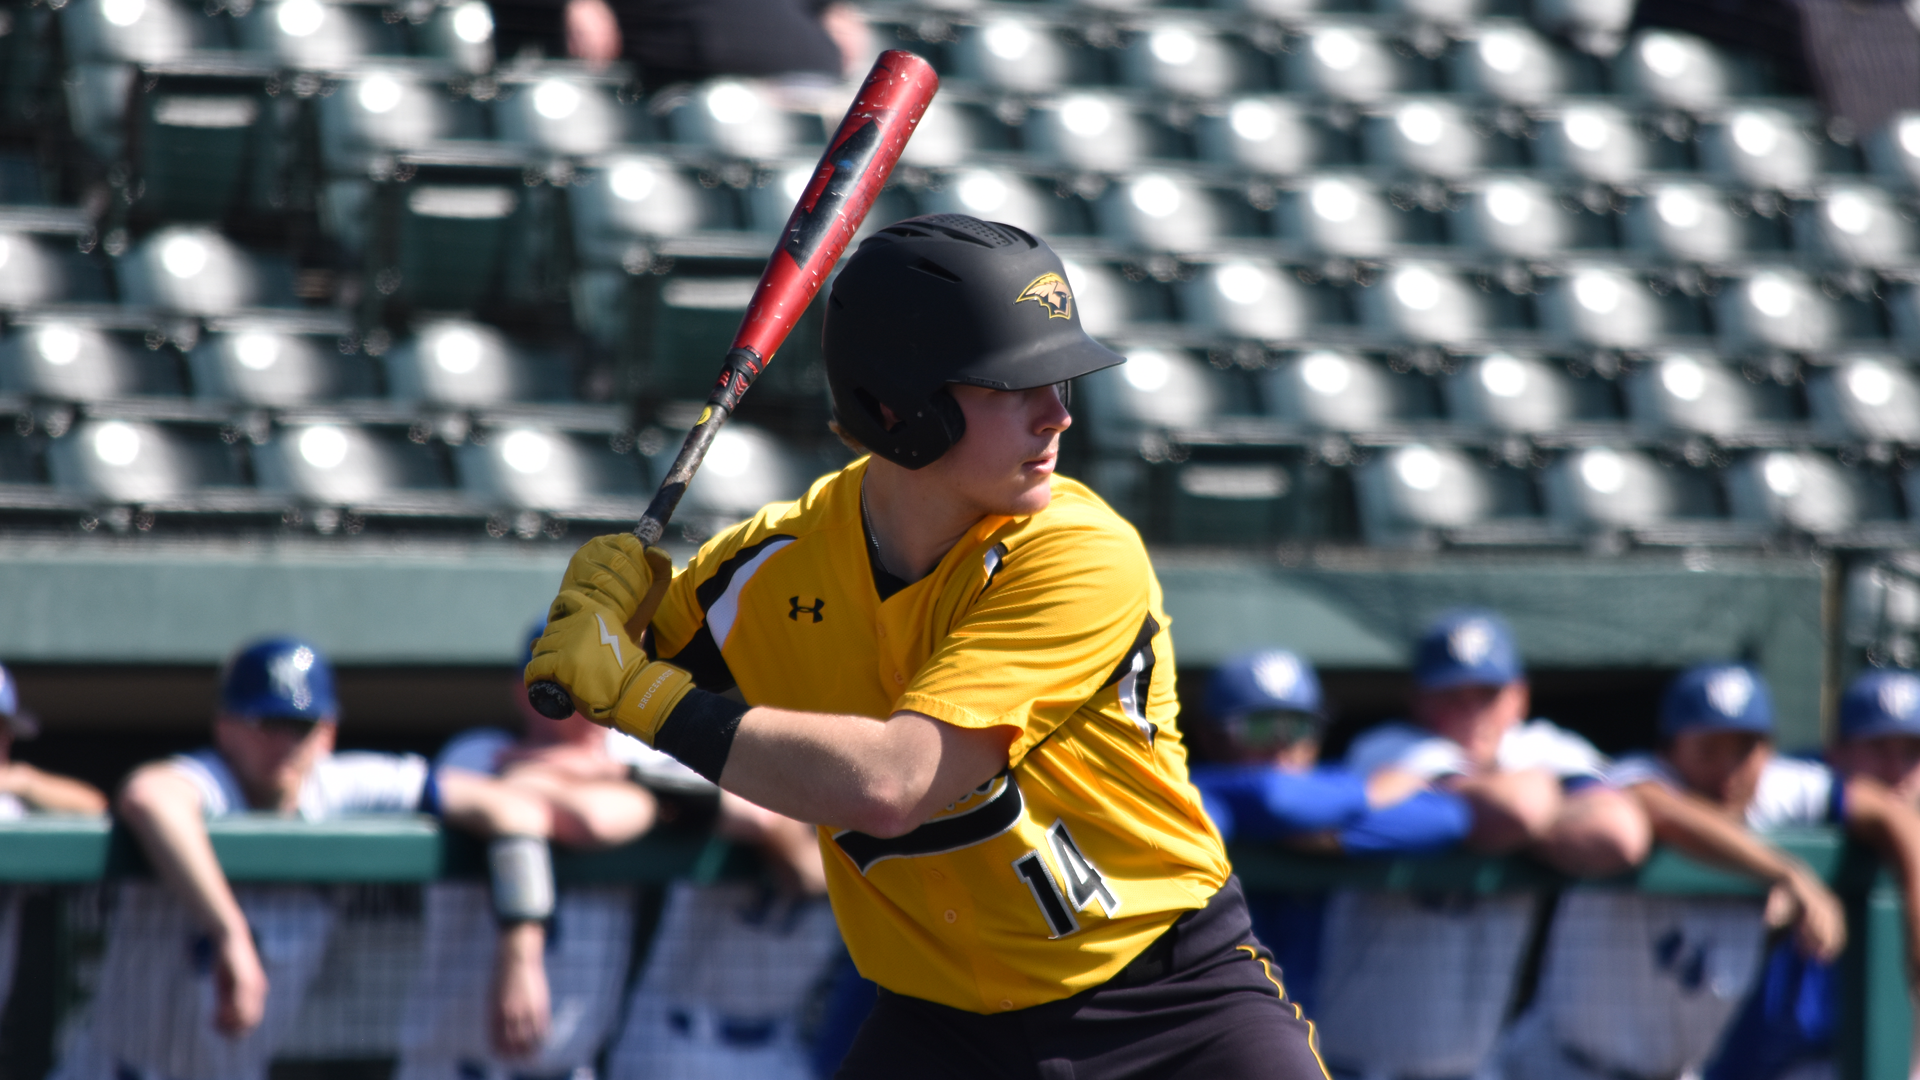 Danny Connelly record an RBI and run in the Titans' Sunday contest against Benedictine University. Photo Credit: Jennifer Zuberbier, UW-Oshkosh Athletics